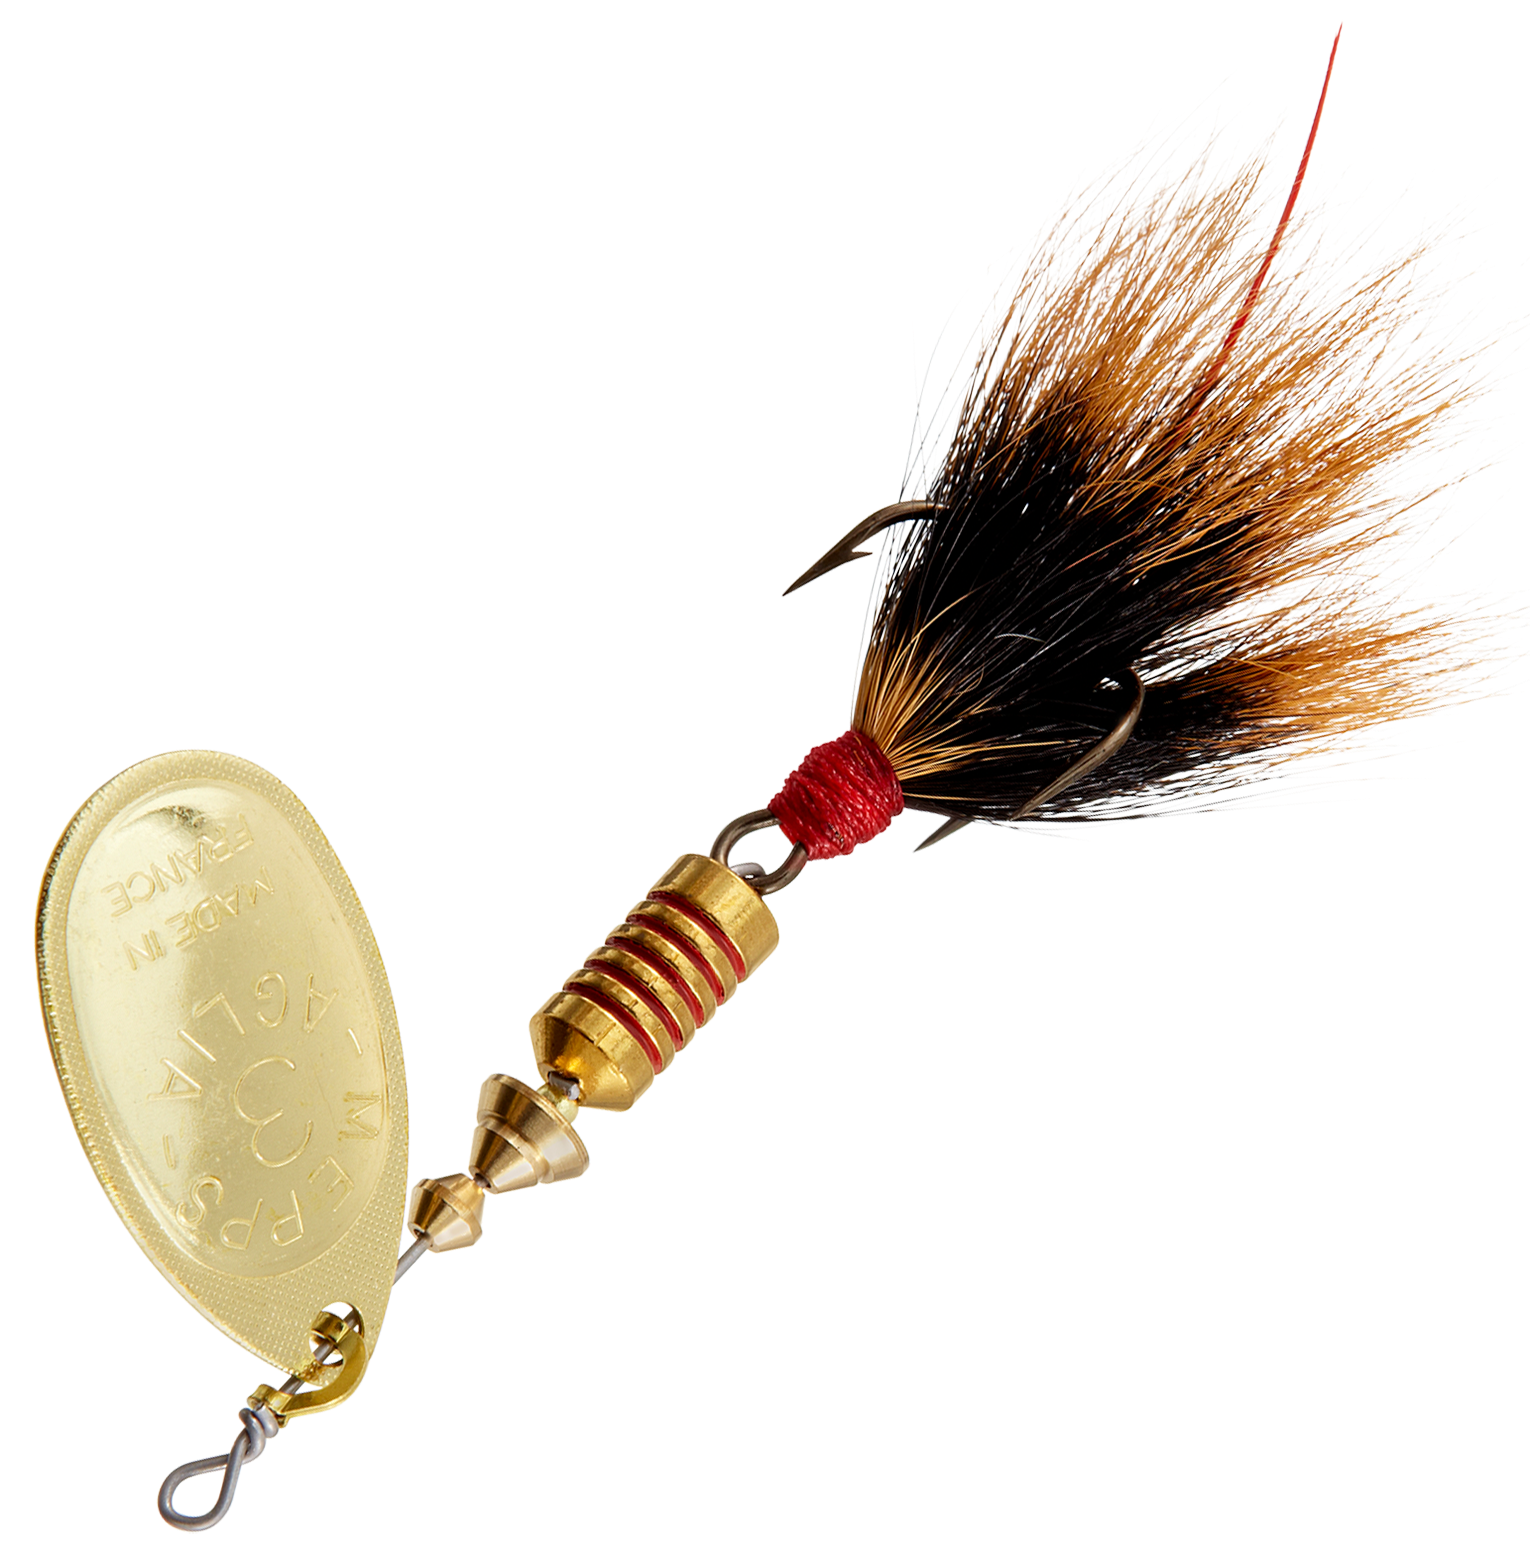 Musky Killer Spinner -3/4oz - Dressed - Gold/Brown Trout Blade/Yellow Tail